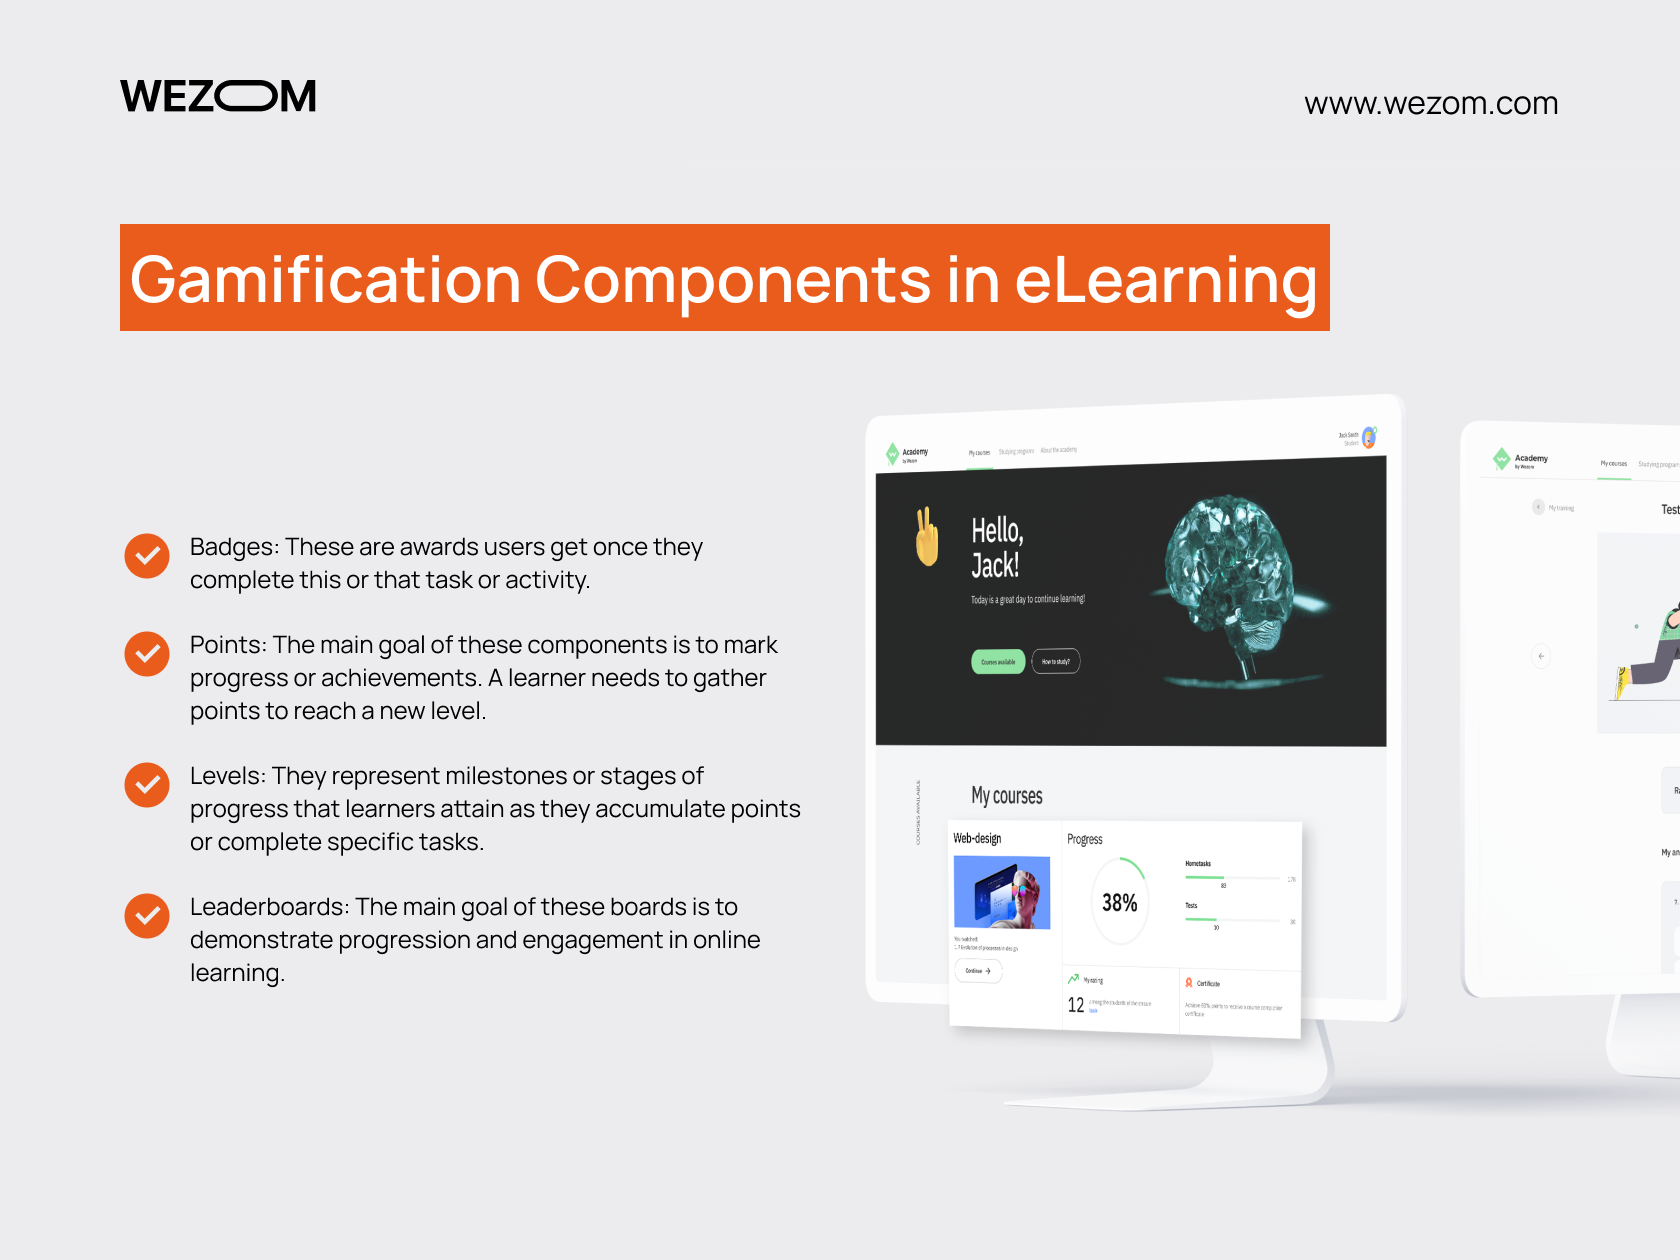 what does gamification add to elearning